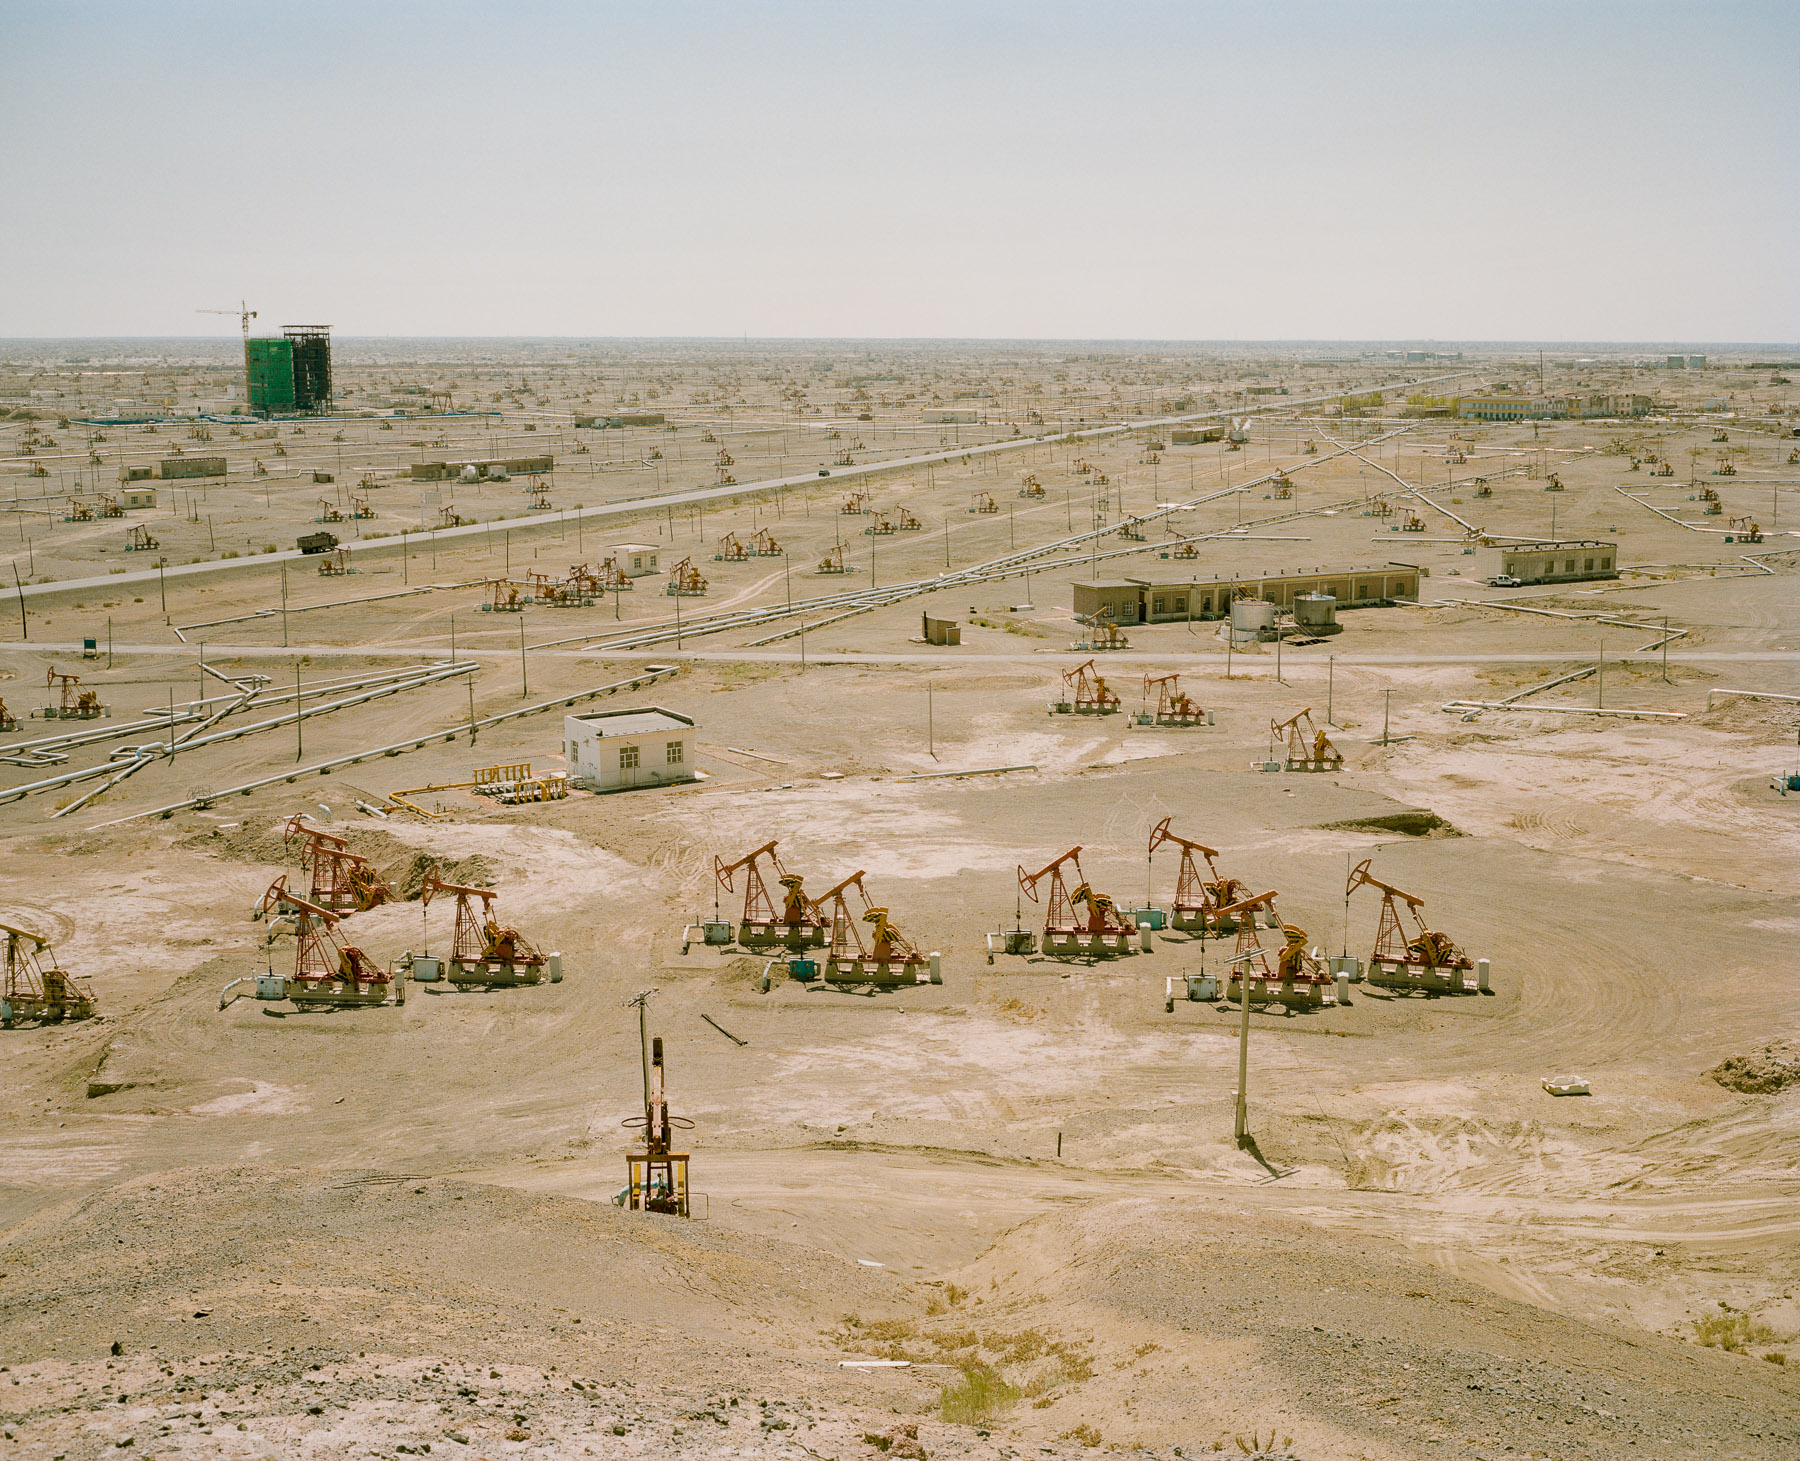  May 2017. Xinjiang province, China. View of the pumps in the oil field in the outskirts of the city of Karamai. 